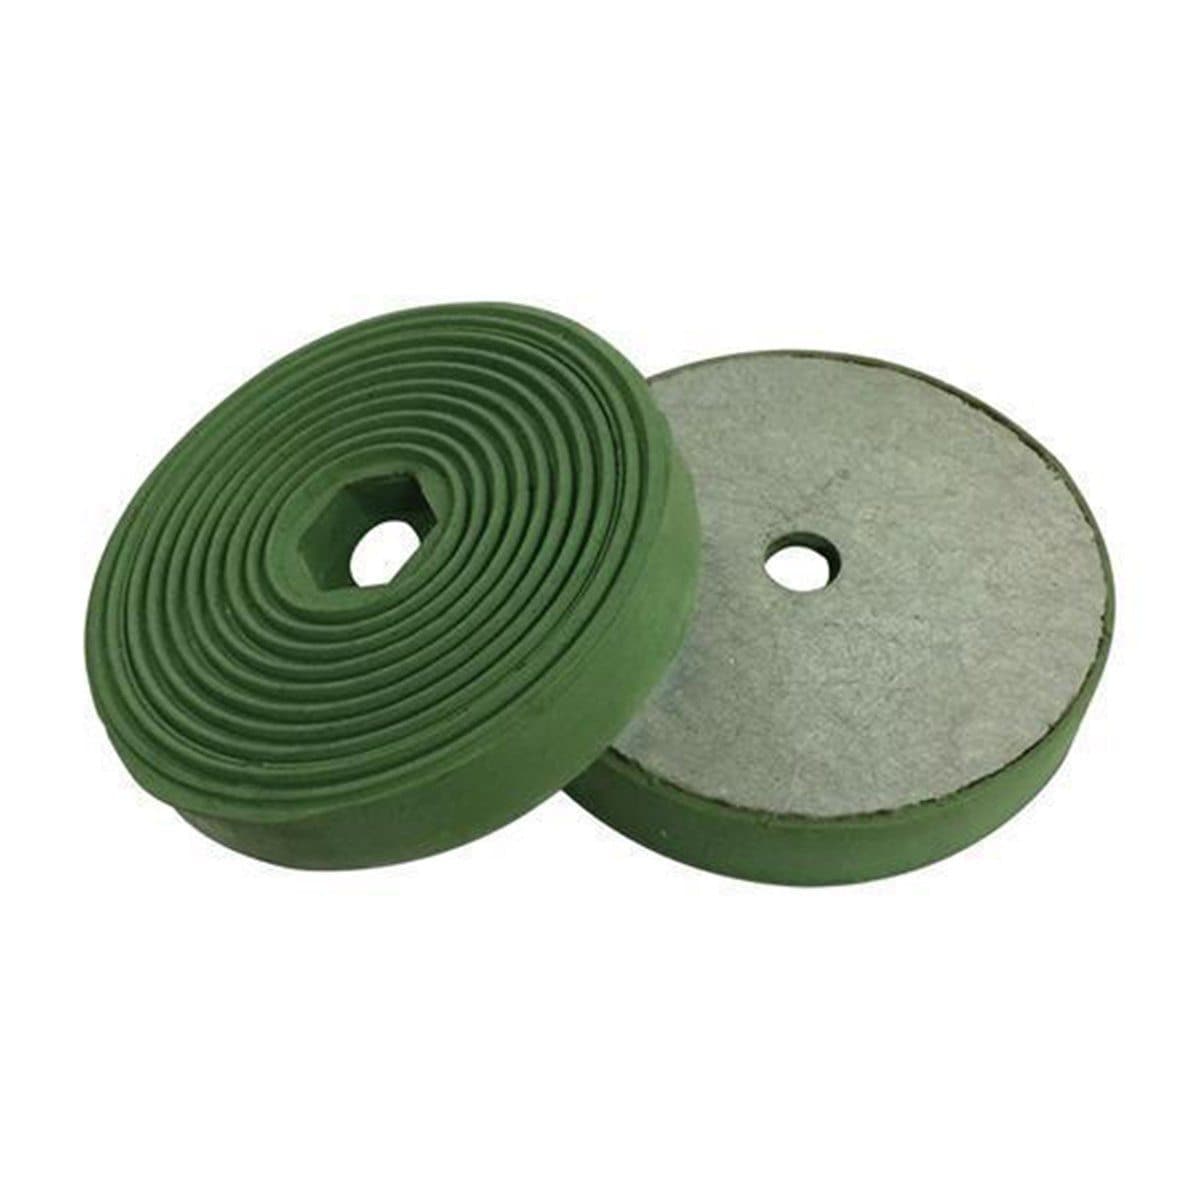 Weha Green Rubber Replacement Pads for the Weha Lifters - Weha